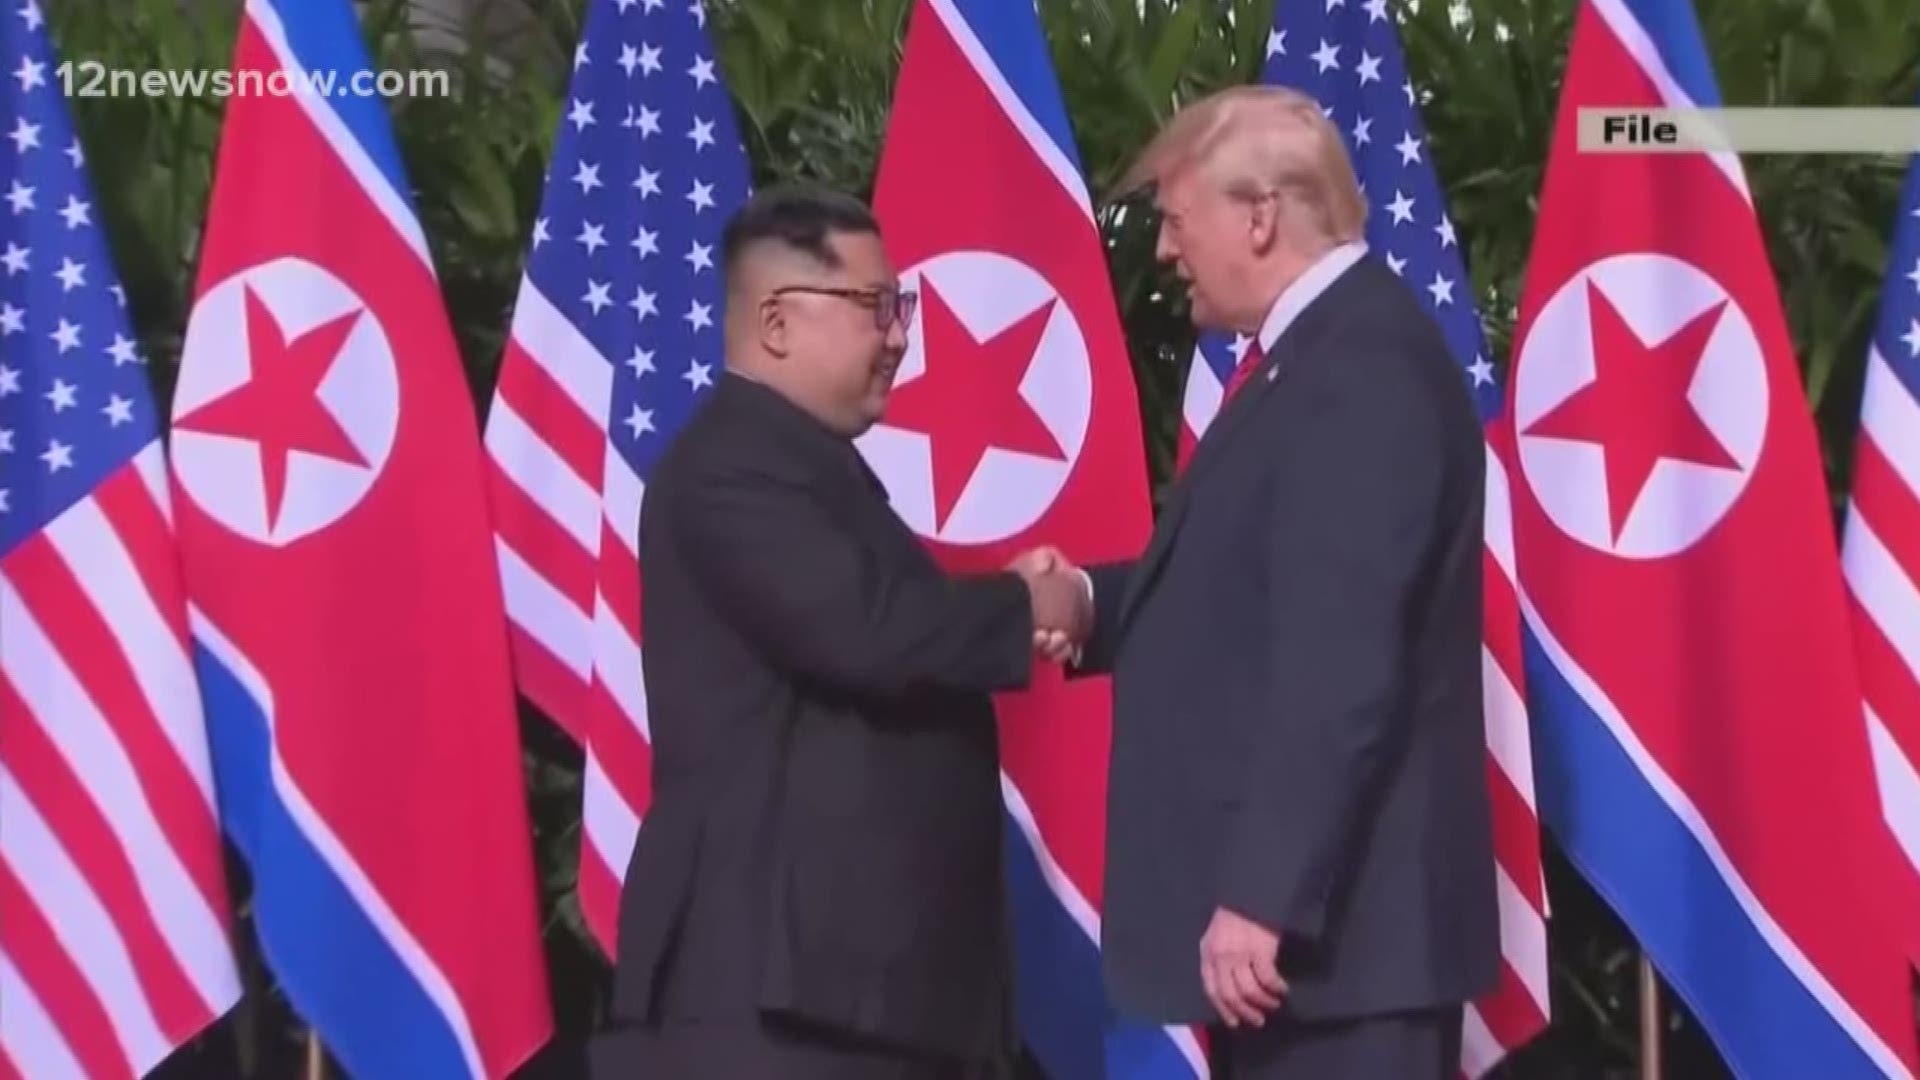 President Trump head to Vietnam for summit with North Korea, in hopes to advance talks to stop North Korea's nuclear weapons program. While he is gone, his former attorney, Michael Cohen is set to testify in front of senate and Mueller report expected to be released.